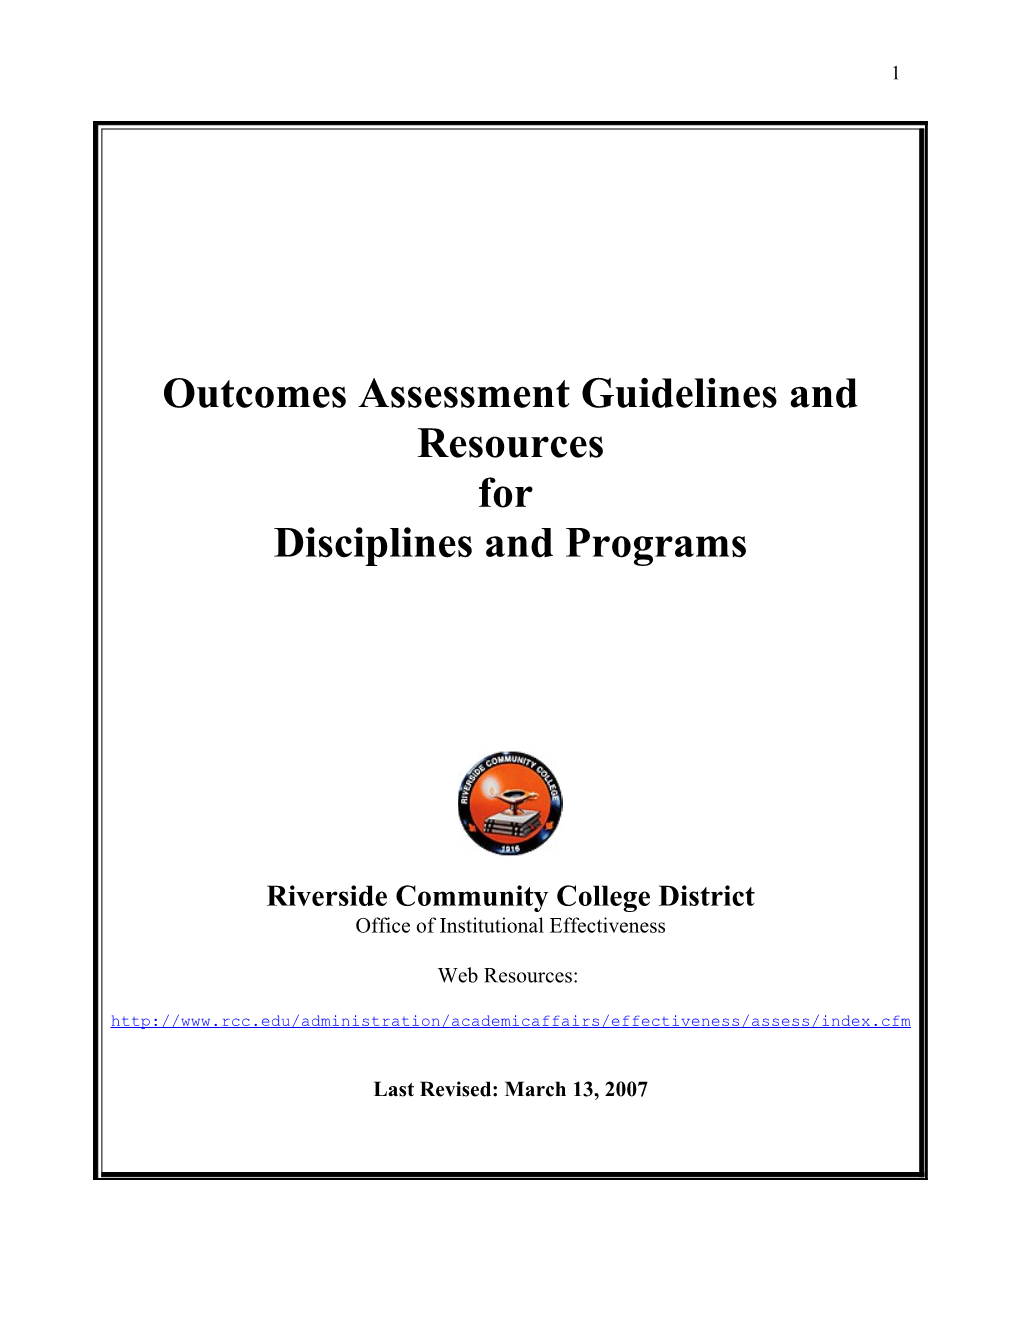 Outcomes Assessment Guidelines and Resources